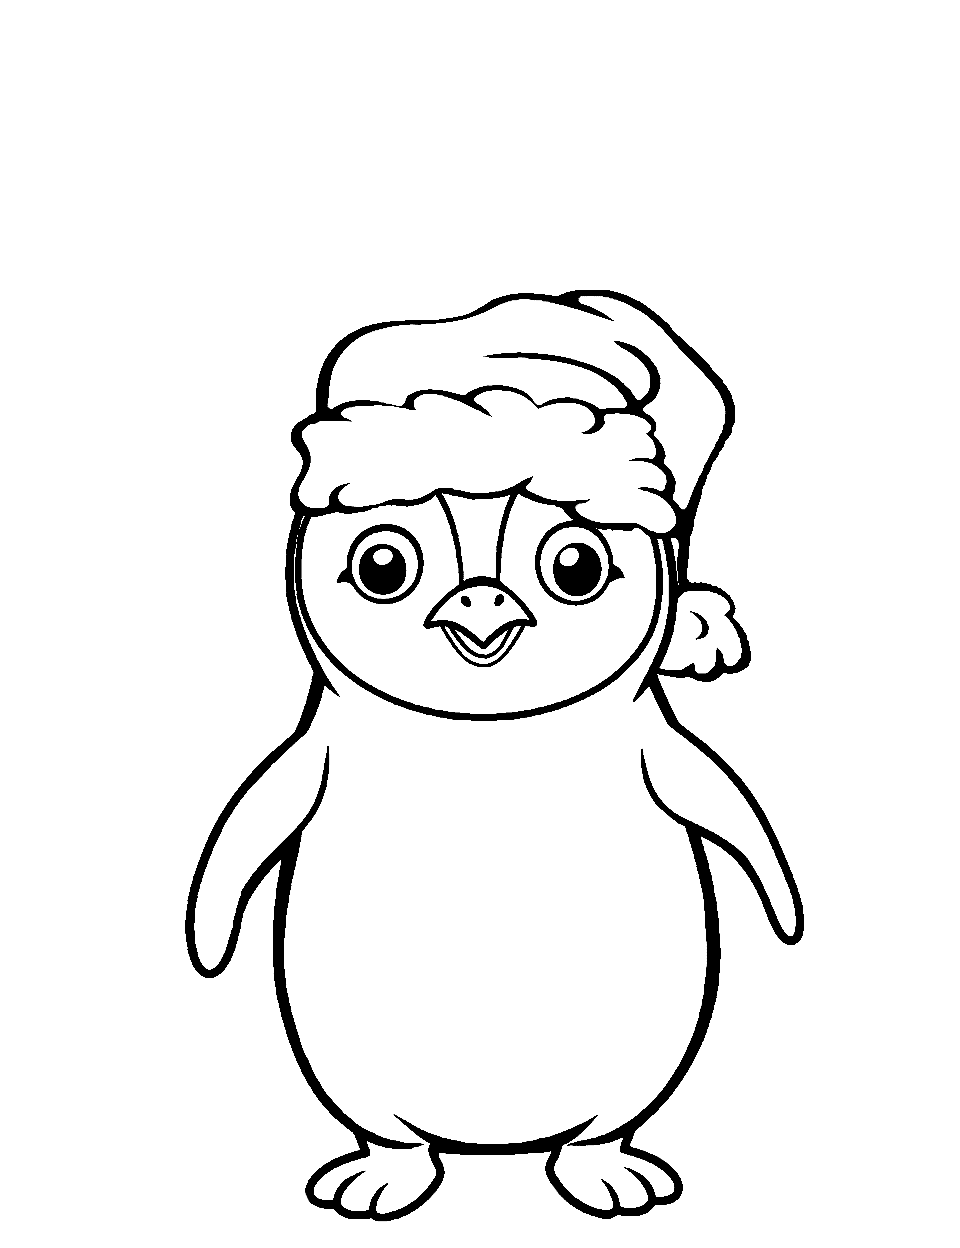 Jolly Penguin Coloring Page - A cheerful penguin wearing a Santa hat.